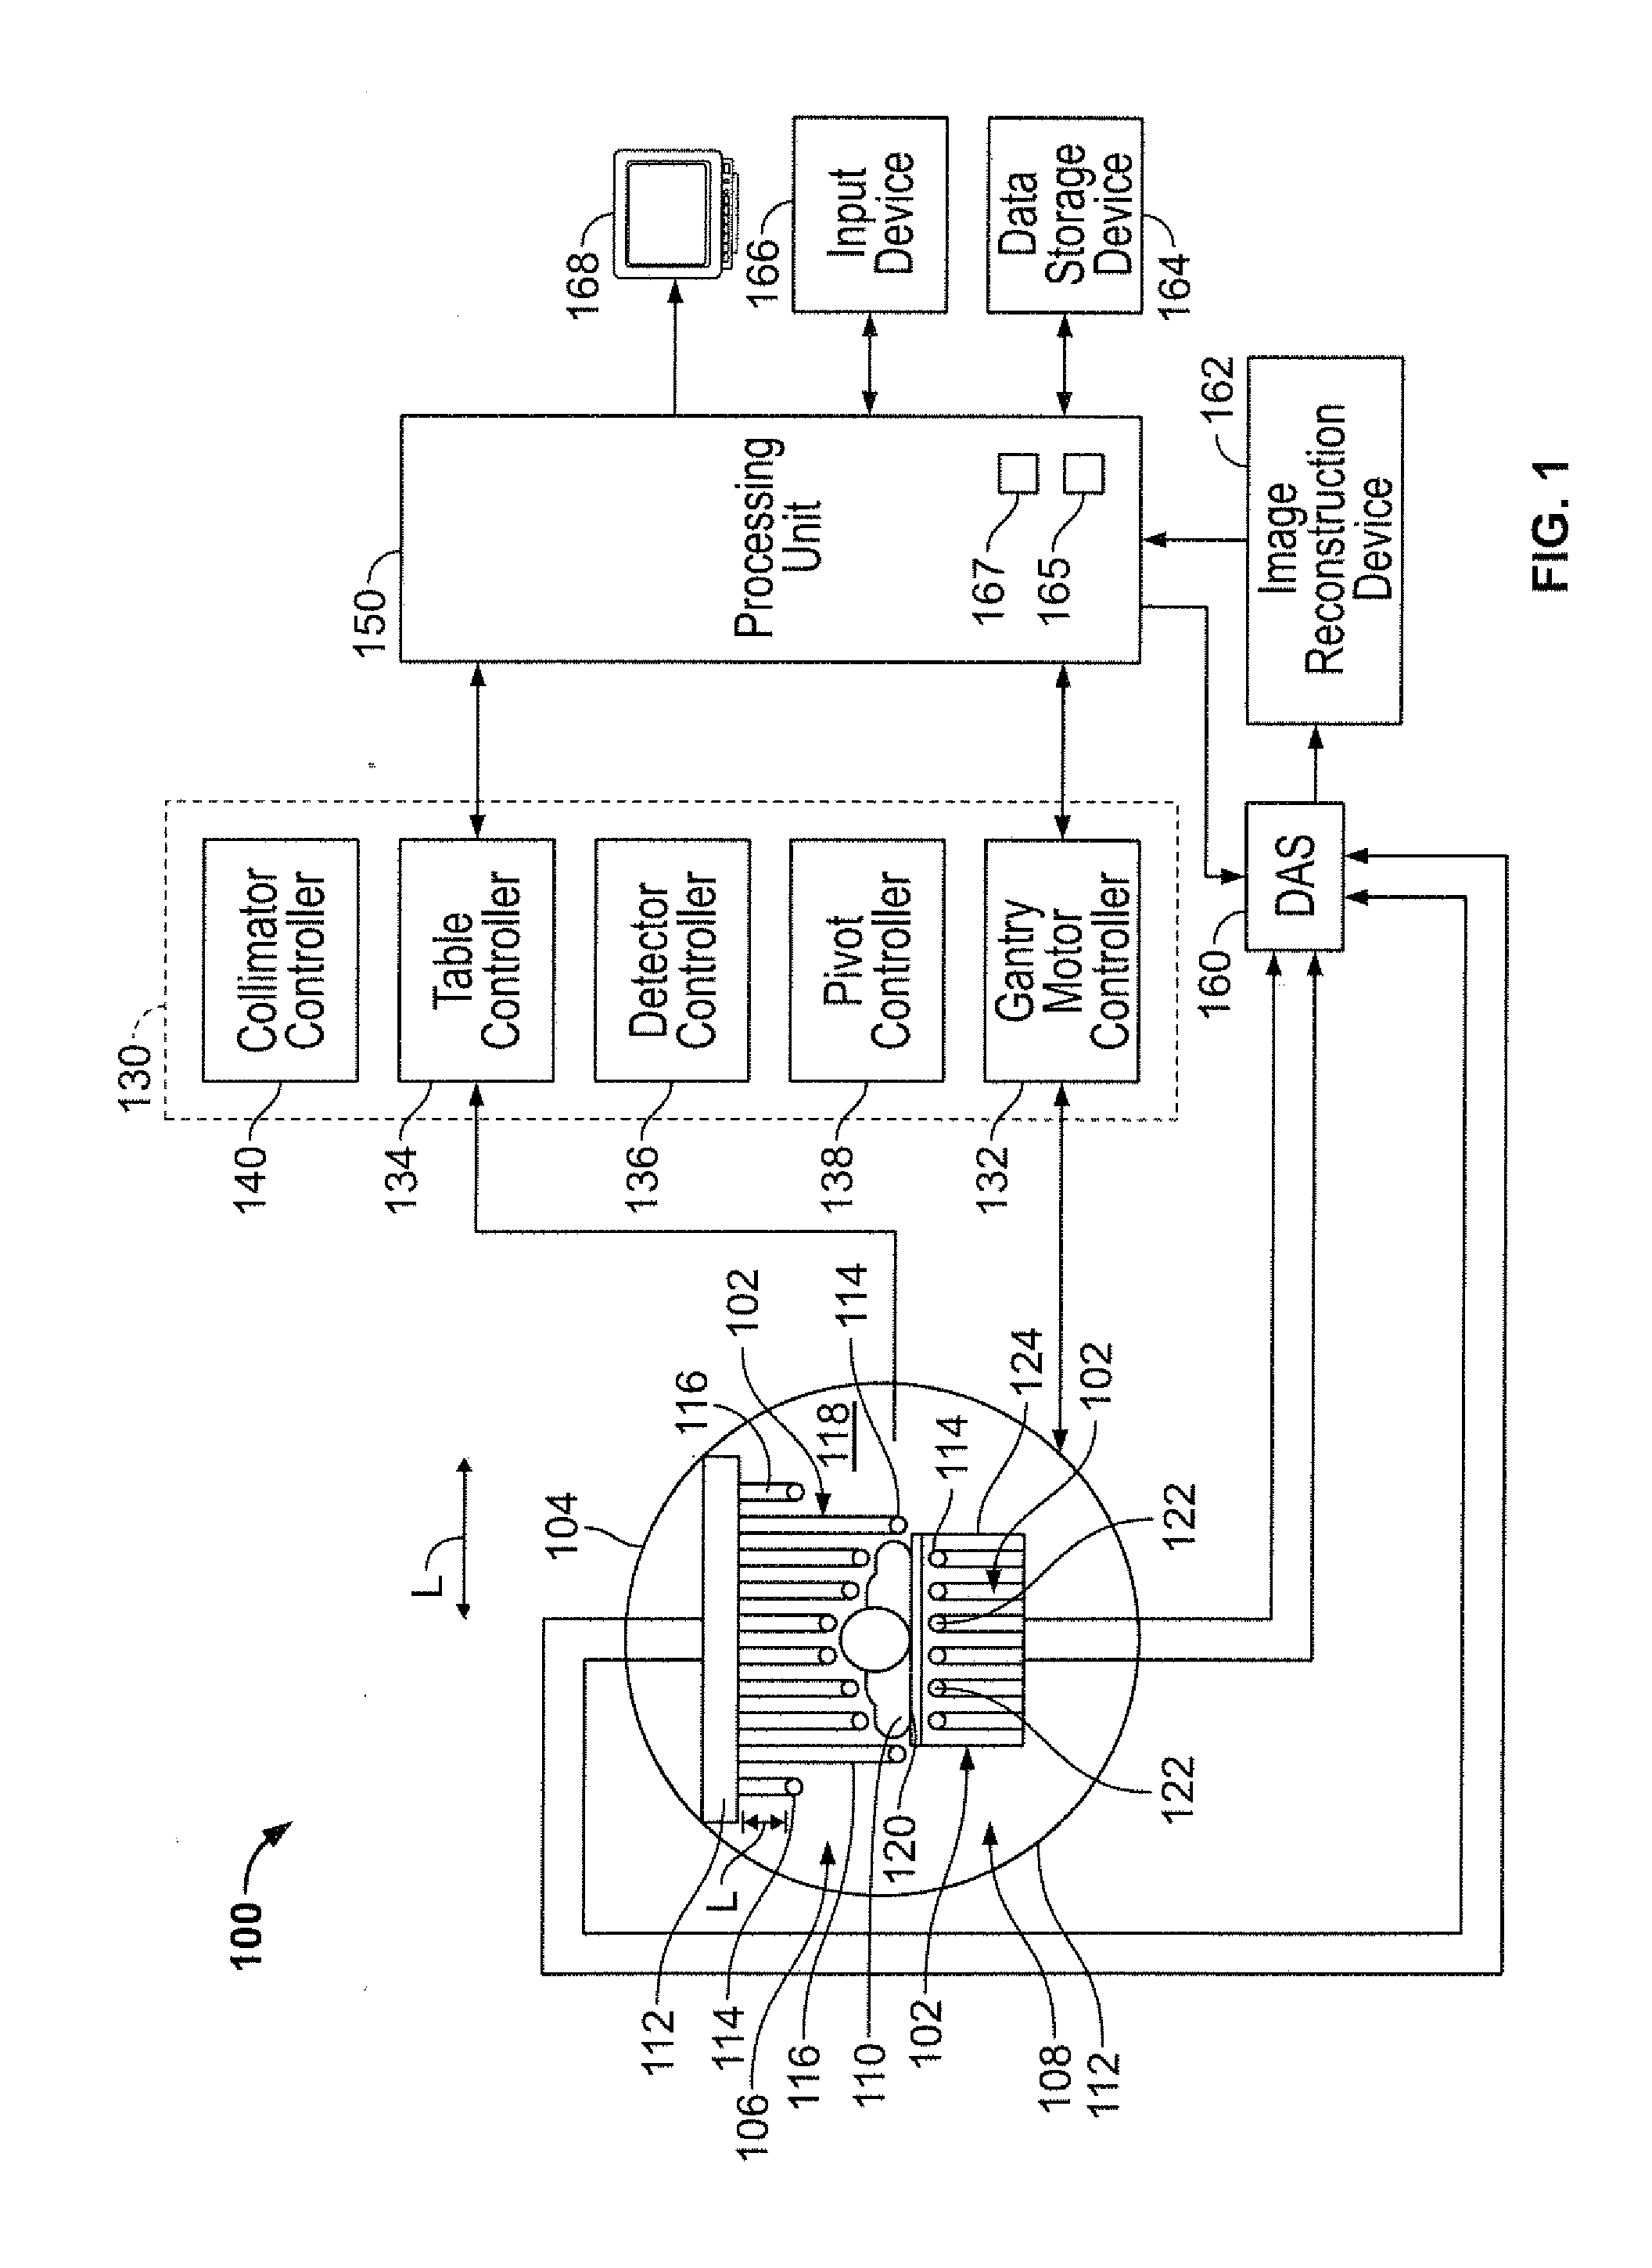 Methods and systems for controlling movement of detectors having multiple detector heads